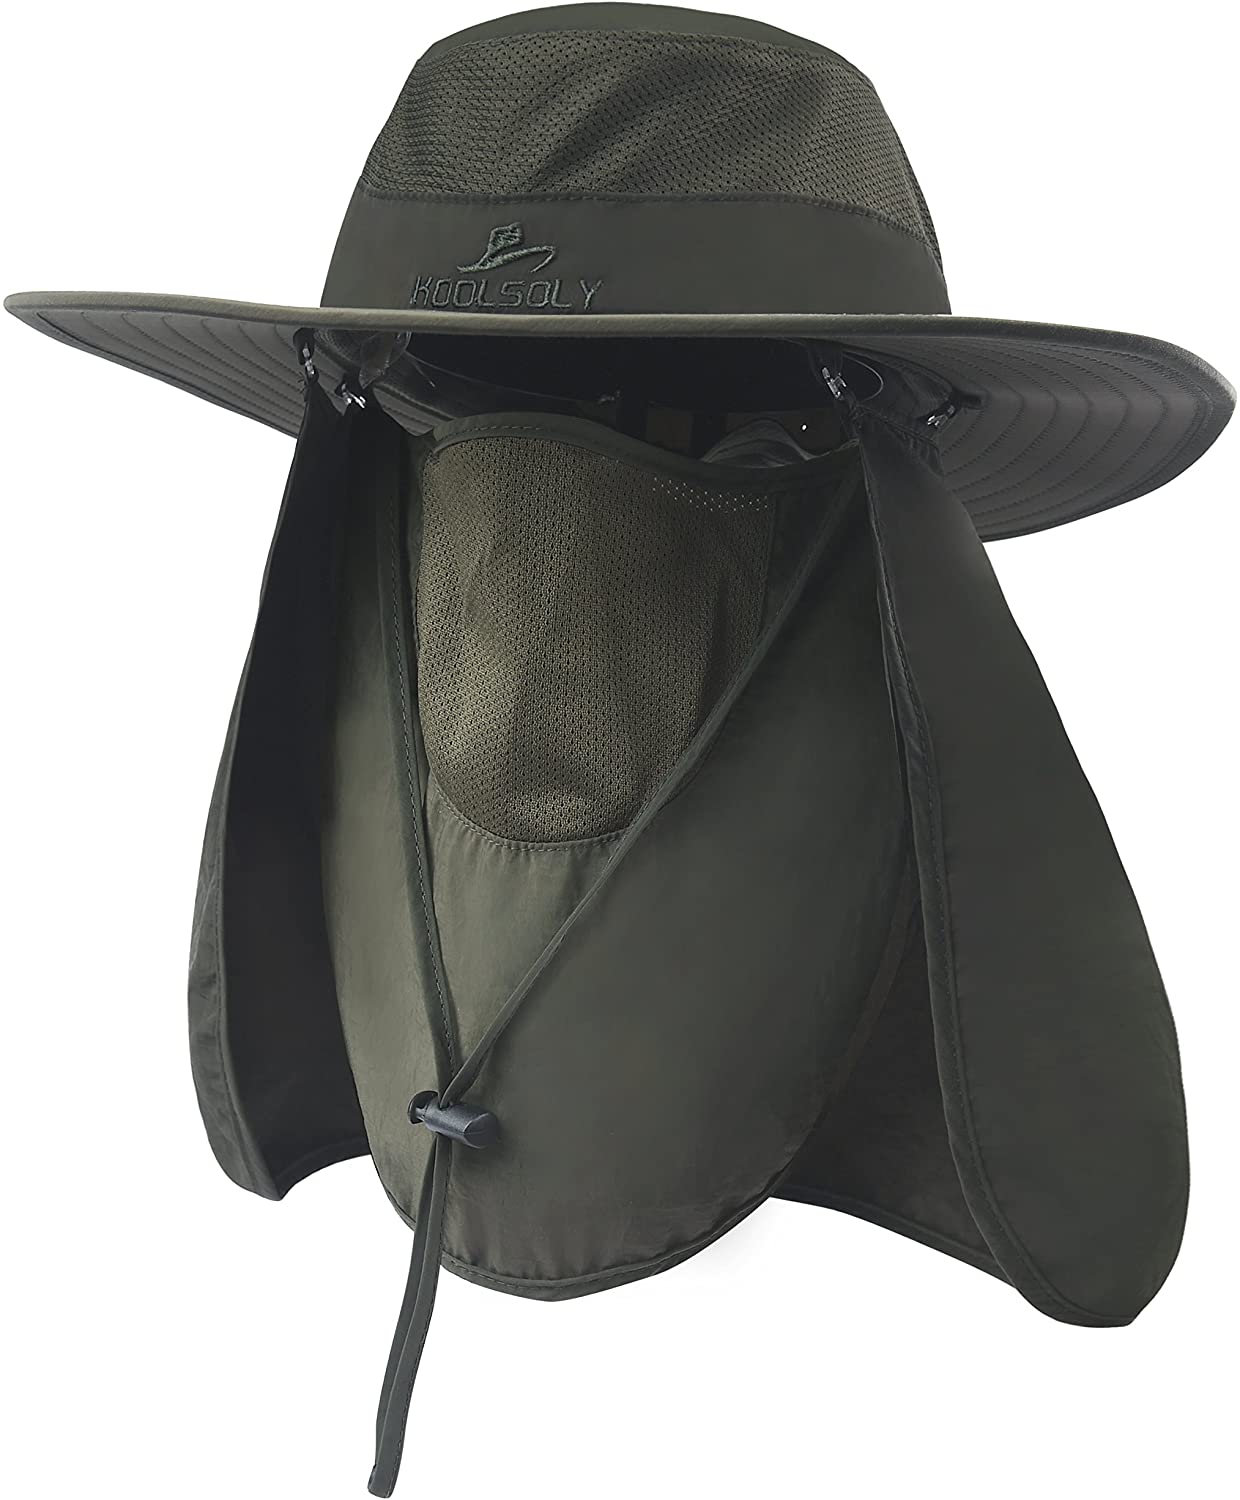 KOOLSOLY Fishing Hat,Sun Cap with UPF 50+ Sun Protection and Neck Flap,for  Man a